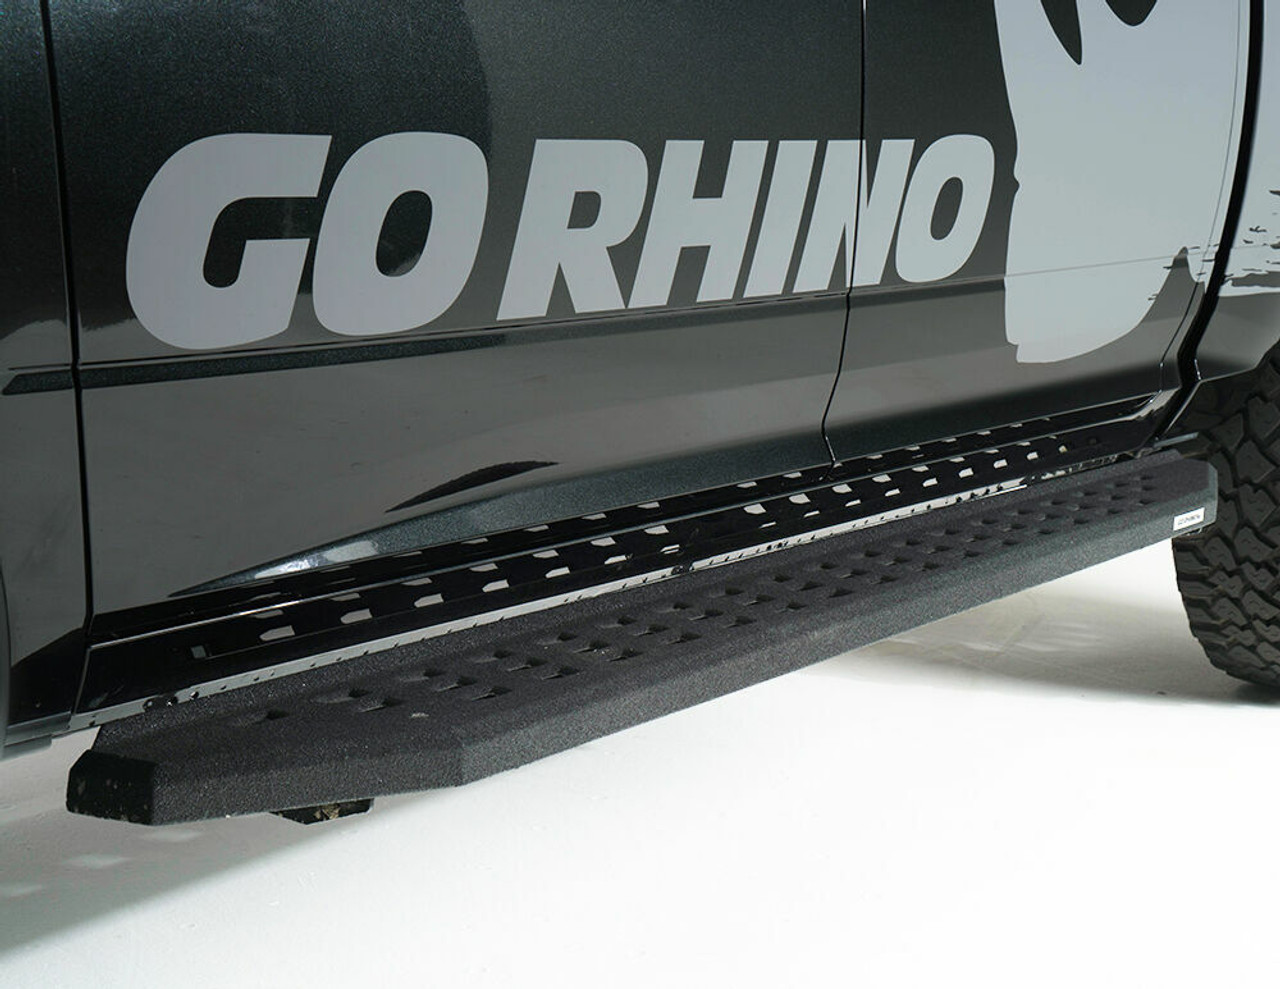 Go Rhino 69404787T Chevrolet, Silverado 2500HD, 3500HD, 2015 - 2019, RB20 Running boards - Complete Kit: RB20 Running boards + Brackets, Galvanized Steel, Protective Bedliner coating, 69400087T RB20 + 6940475 RB Brackets, Gasoline only